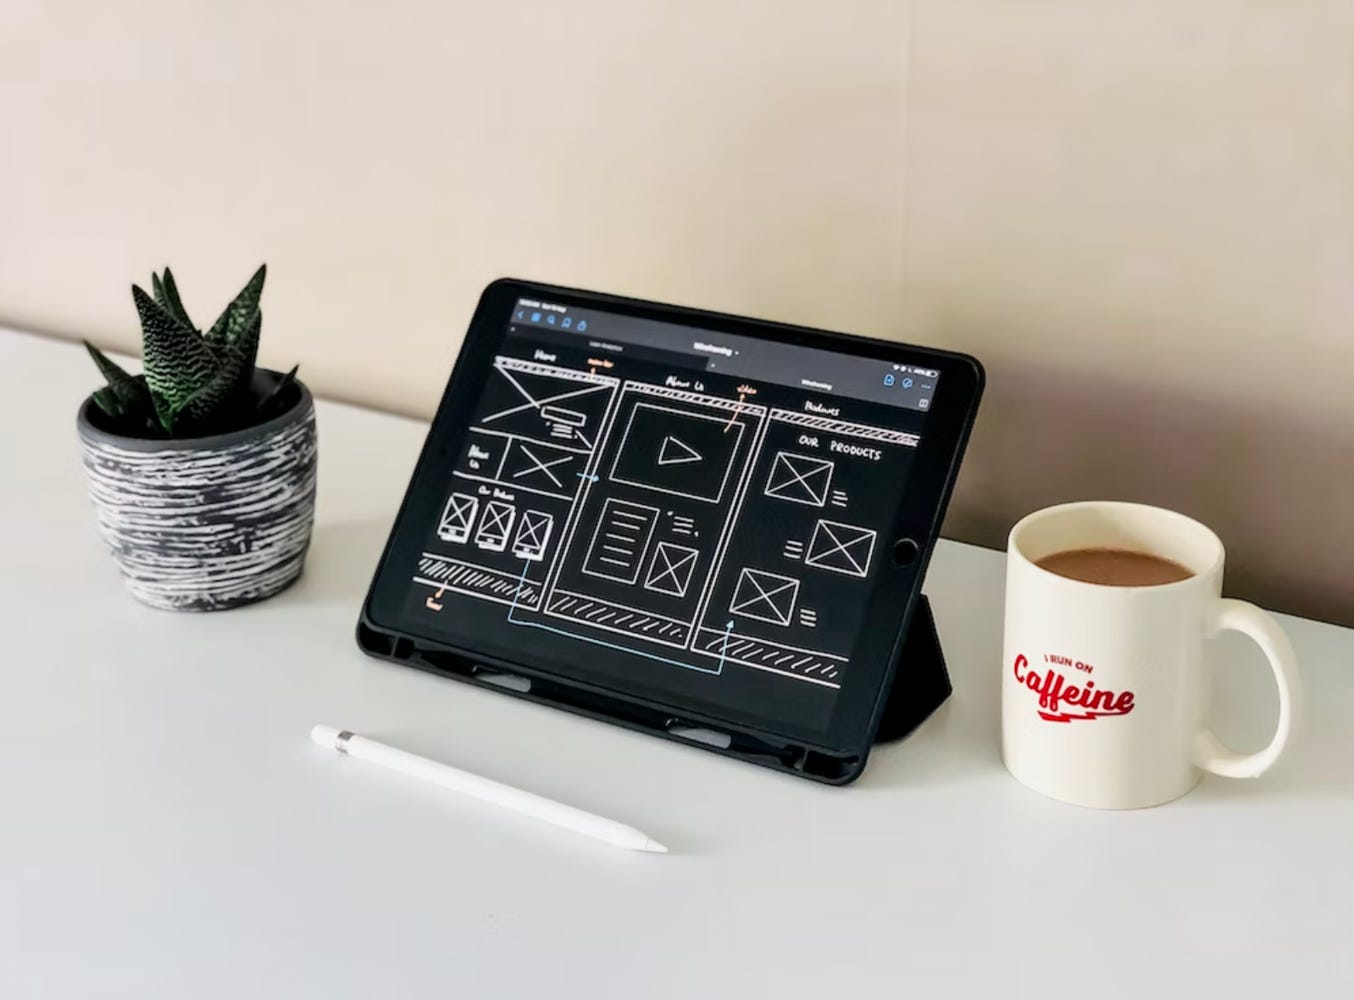 wireframe sketch on a tablet, sitting on a desk next to a cup of coffee and a succulent